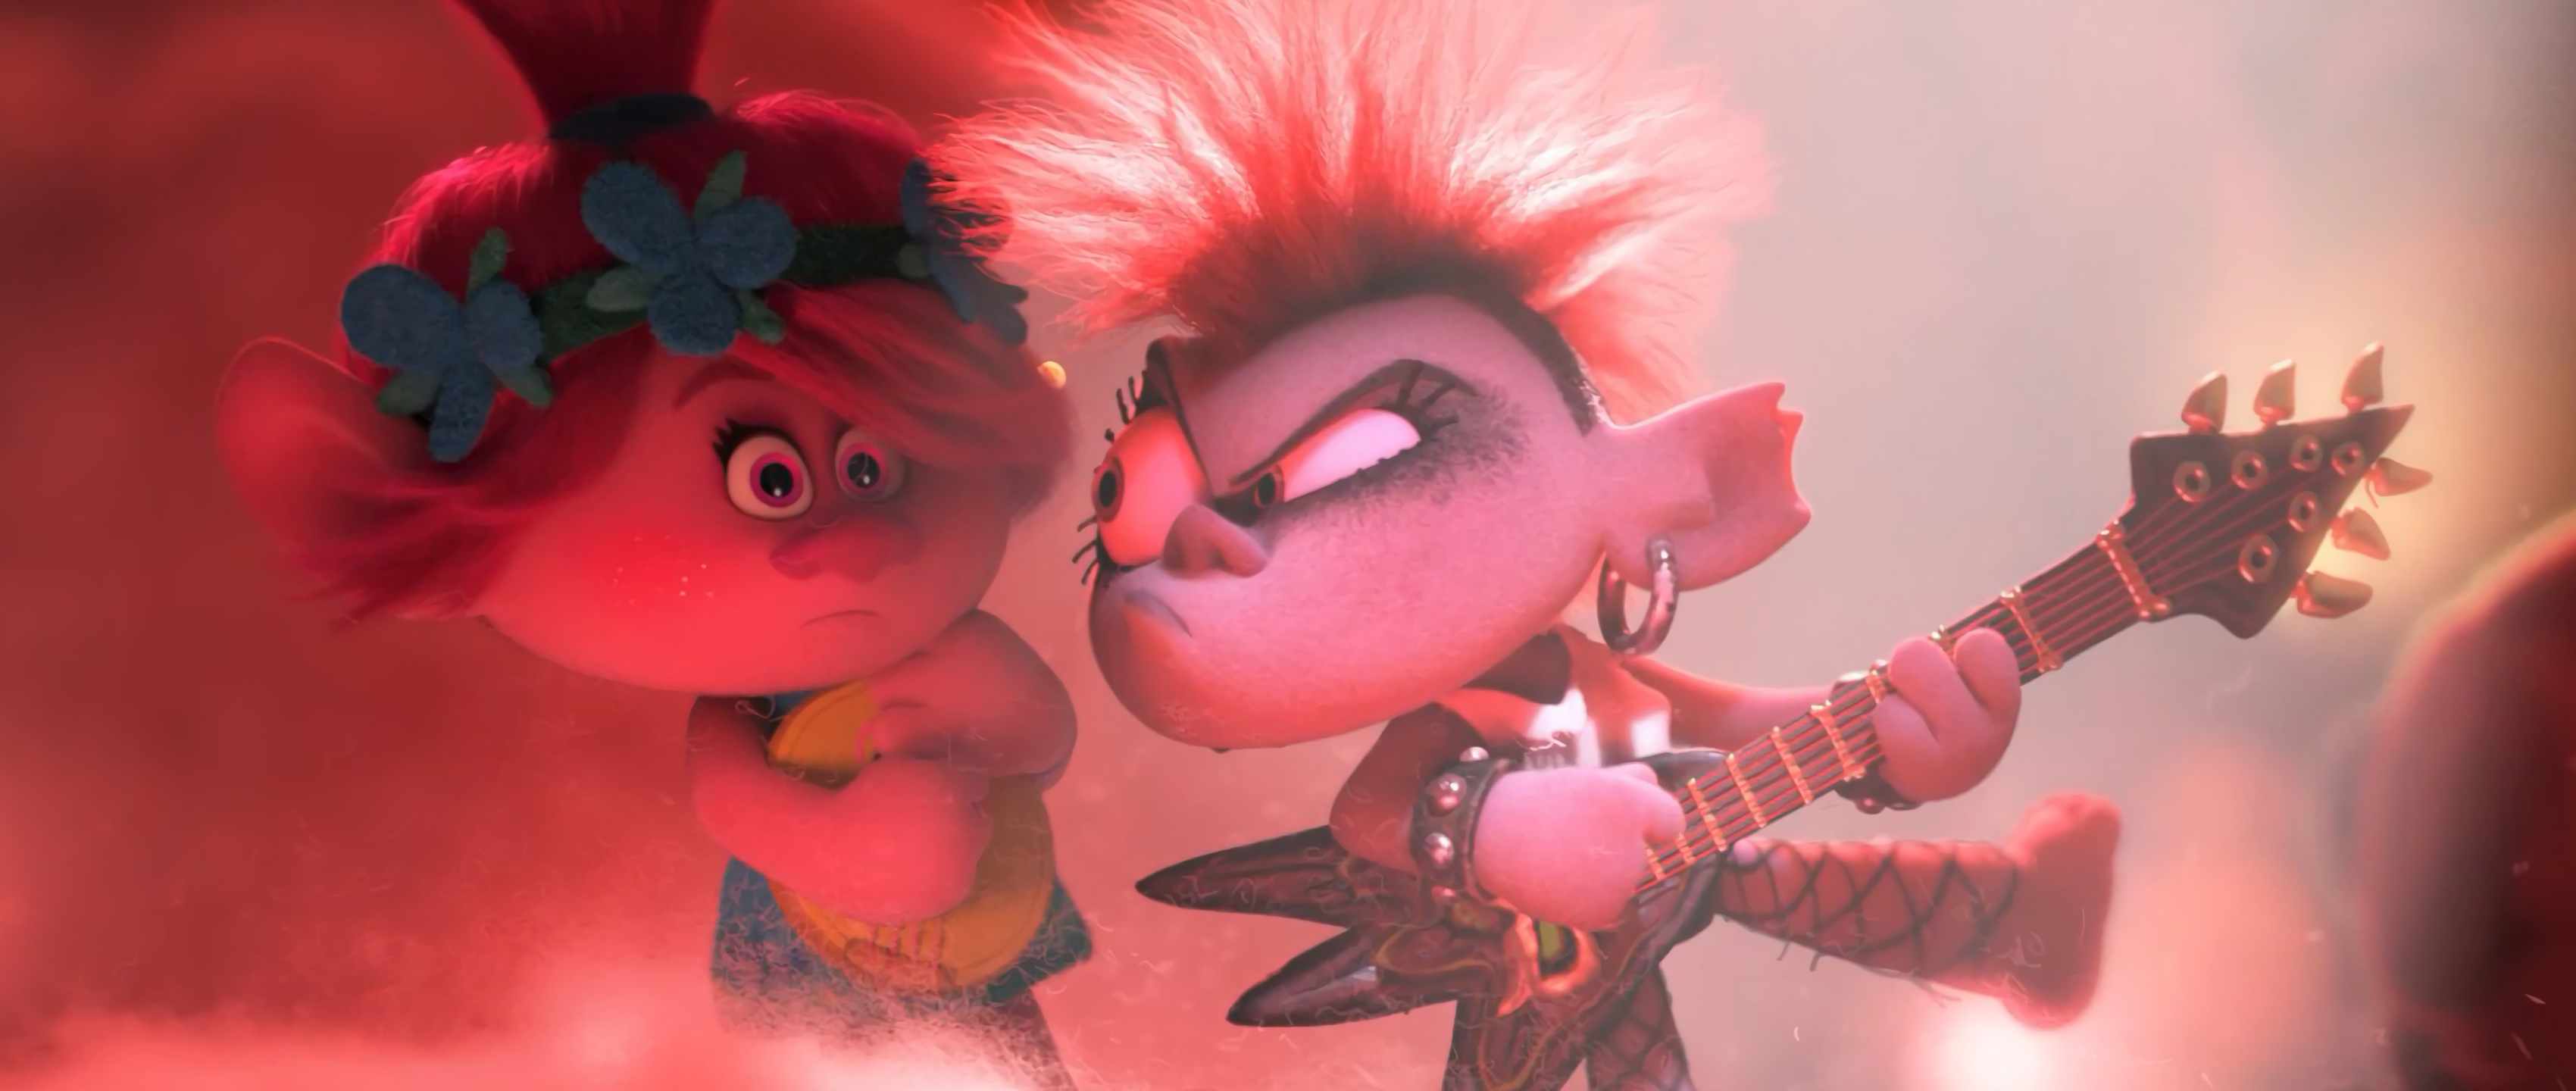 3400x1440 Poppy and Queen Barb In Trolls World Tour 3400x1440 ...